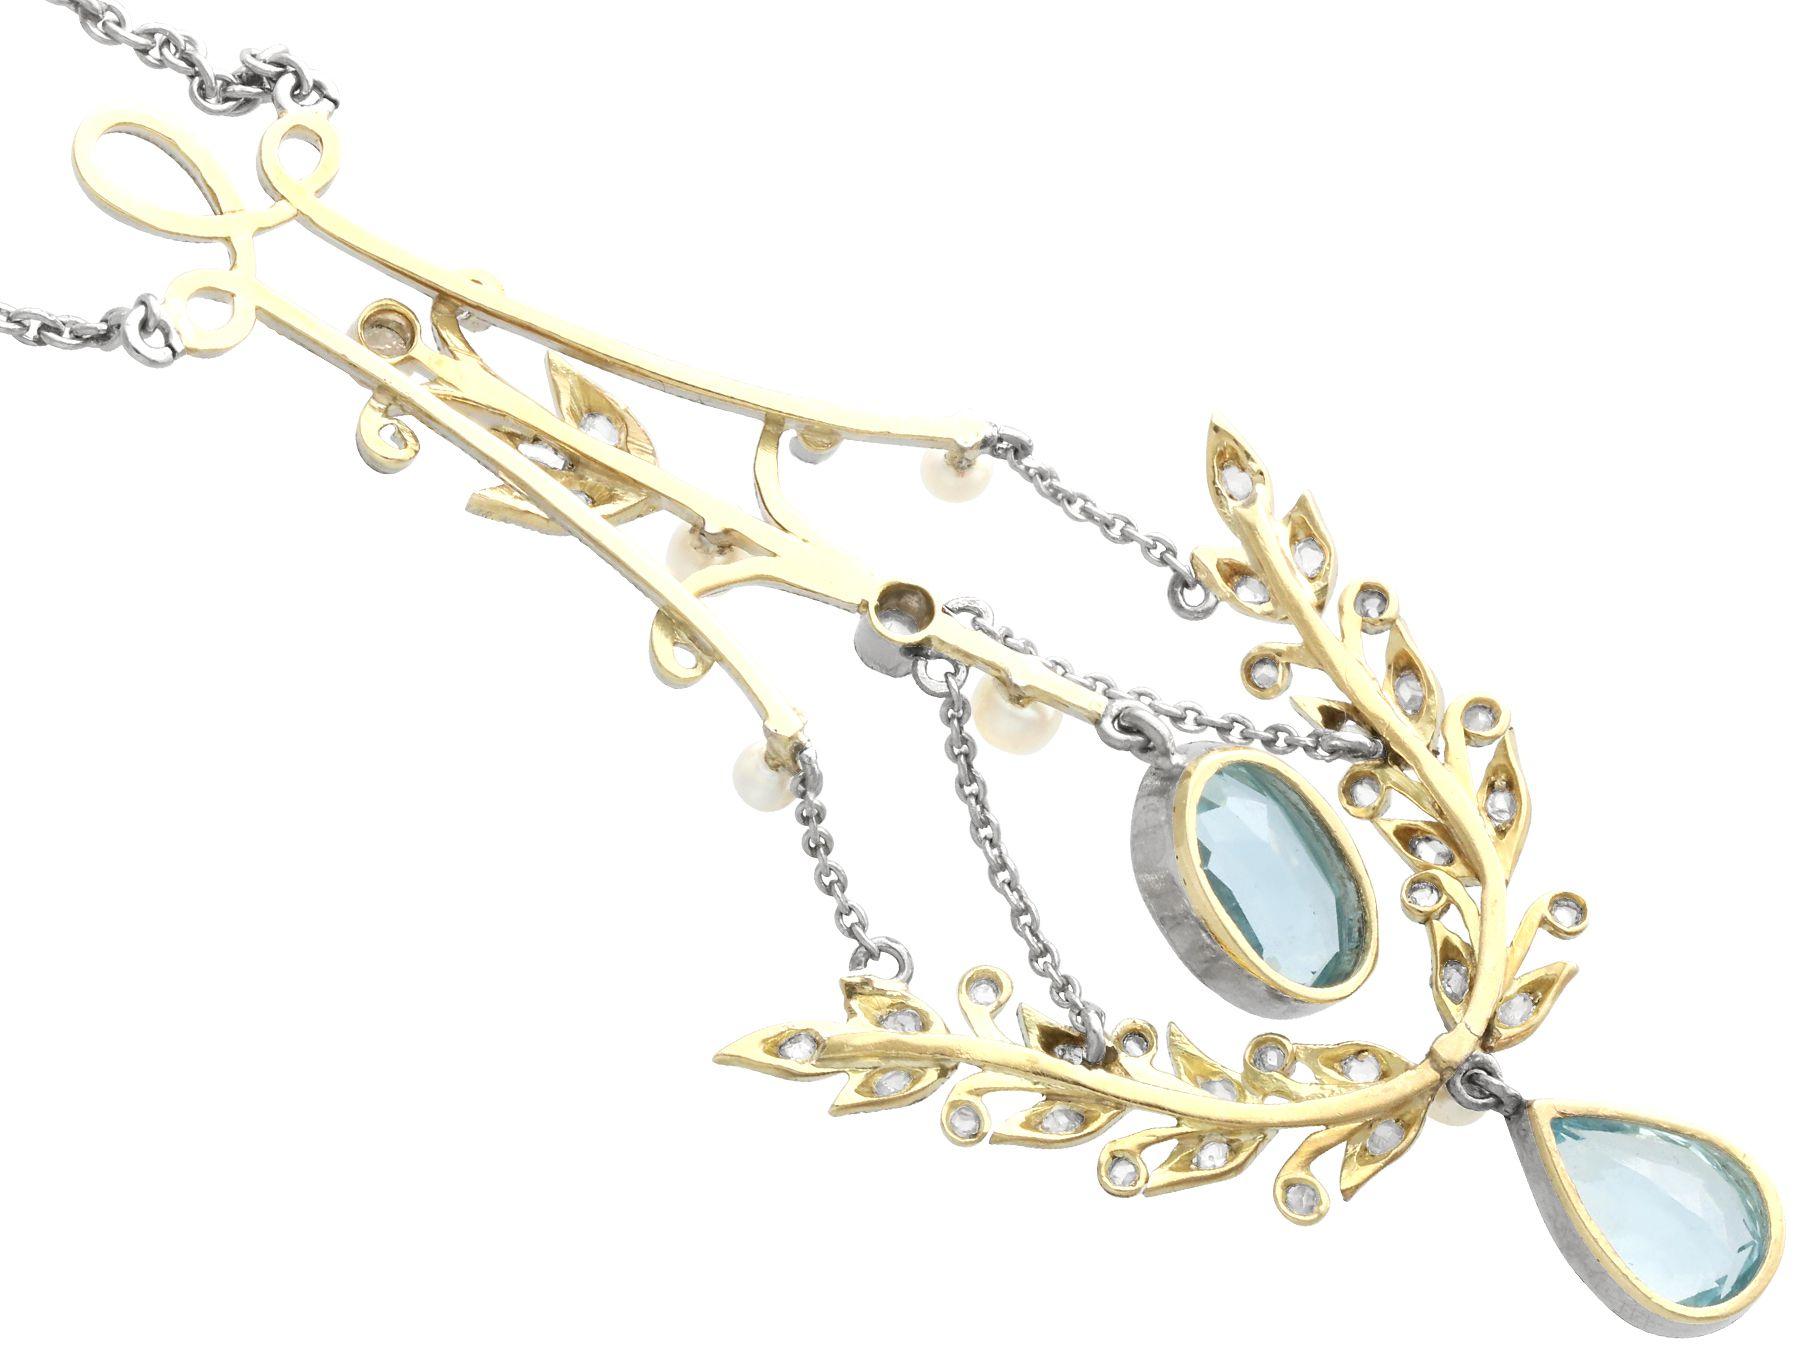 Antique Aquamarine Diamond Pearl and Yellow Gold Pendant In Excellent Condition For Sale In Jesmond, Newcastle Upon Tyne